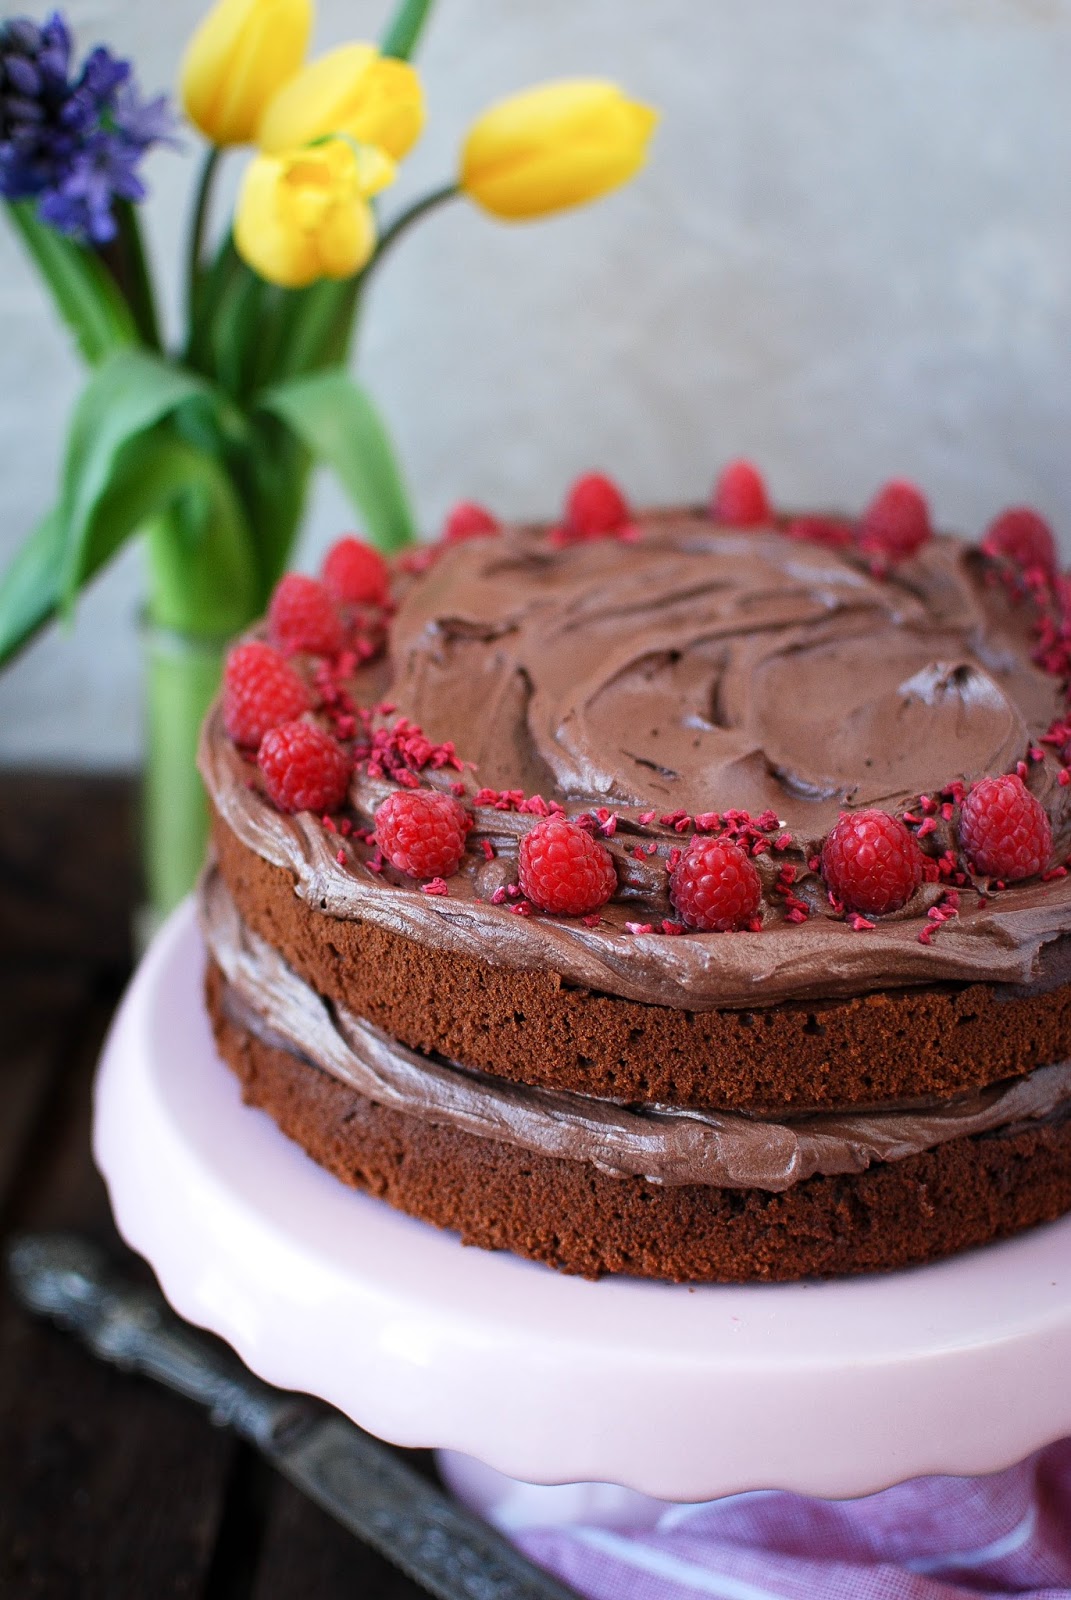 The best vegan chocolate cake recipe ever, give it a try and see for yourself.